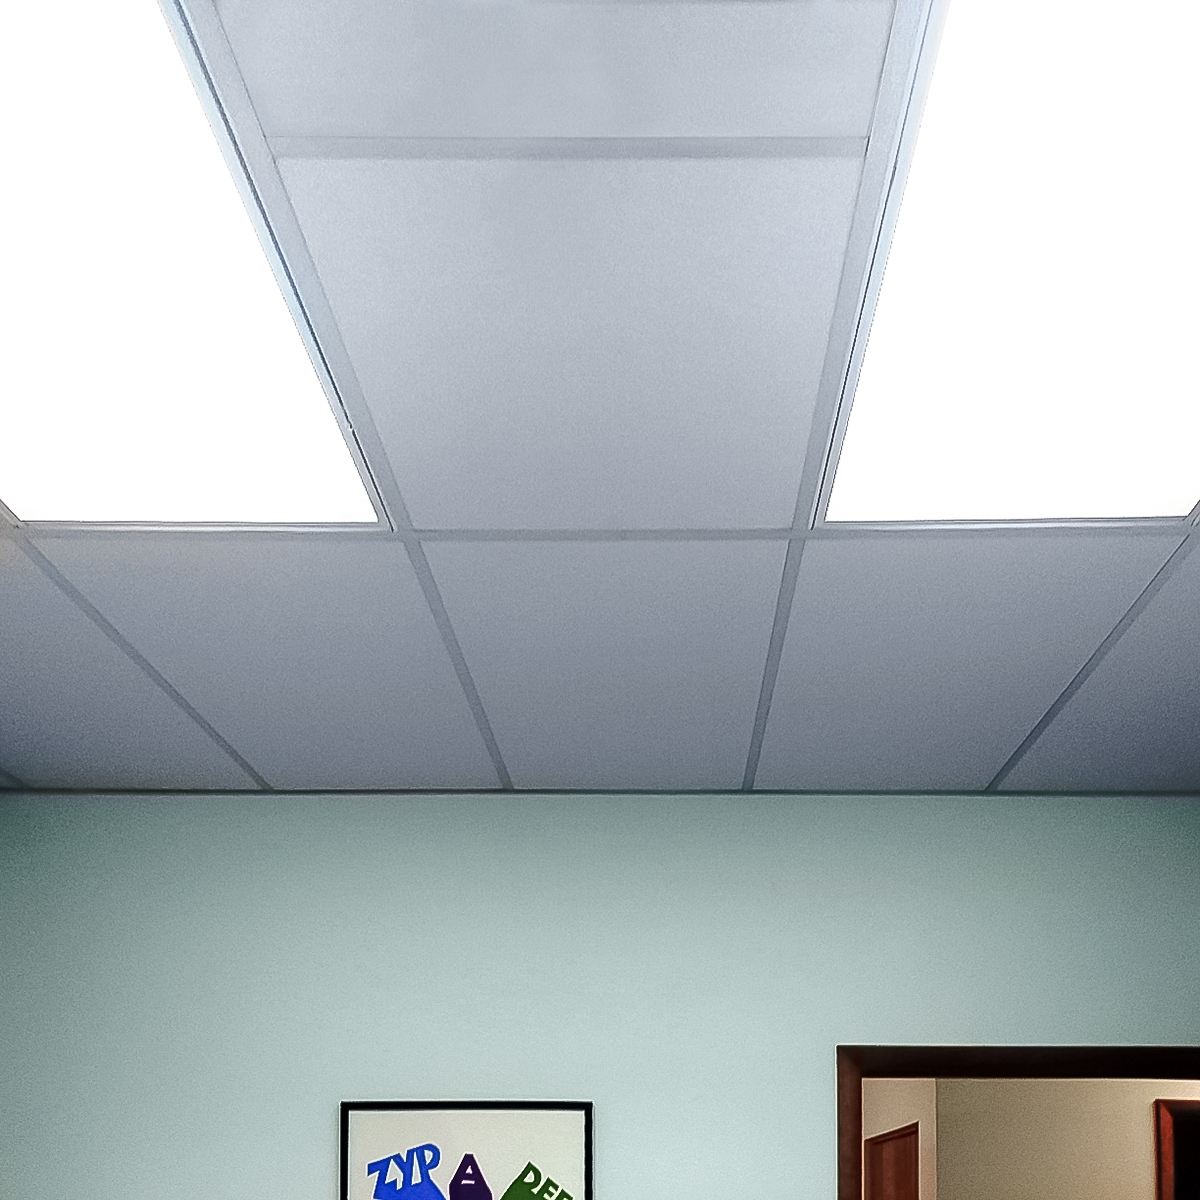 Permalink to Acoustic Ceiling Tiles Pictures